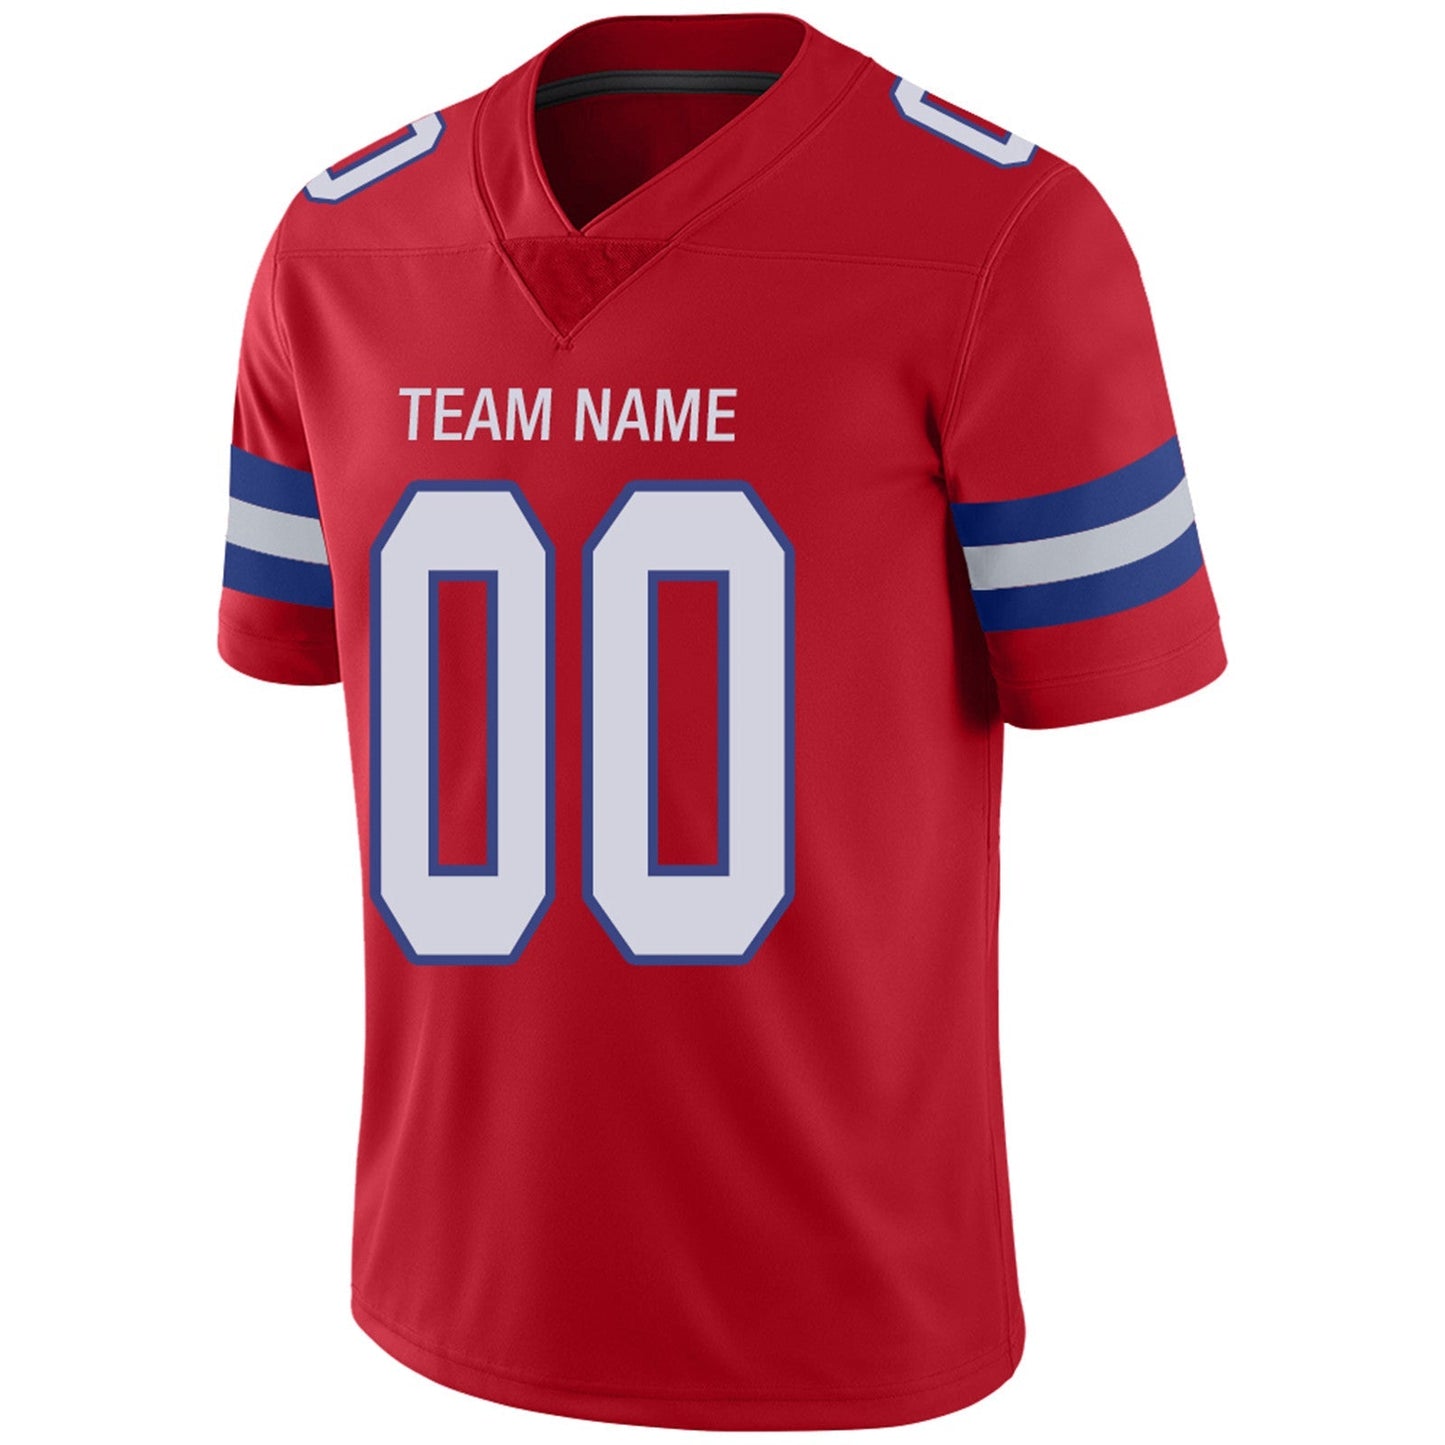 Custom NE.Patriots Football Jerseys Team Player or Personalized Design Your Own Name for Men's Women's Youth Jerseys Navy